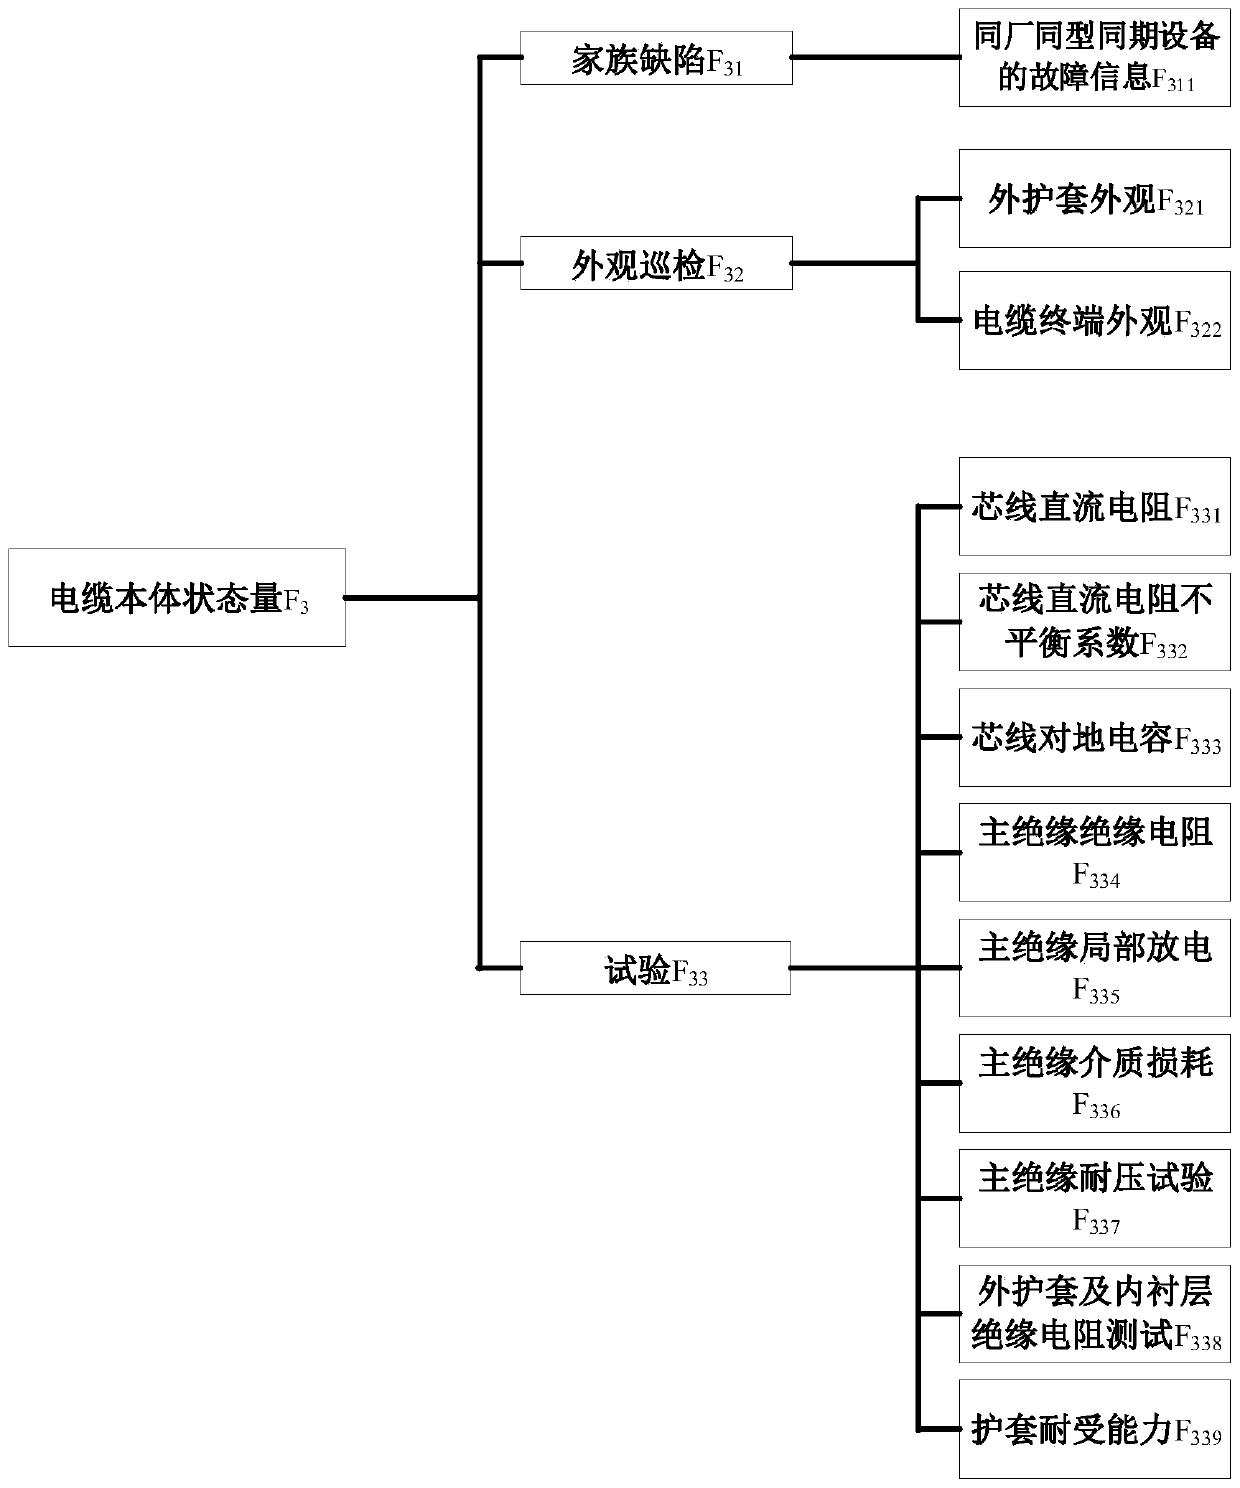 Cable tunnel comprehensive state evaluation method based on operation and maintenance system